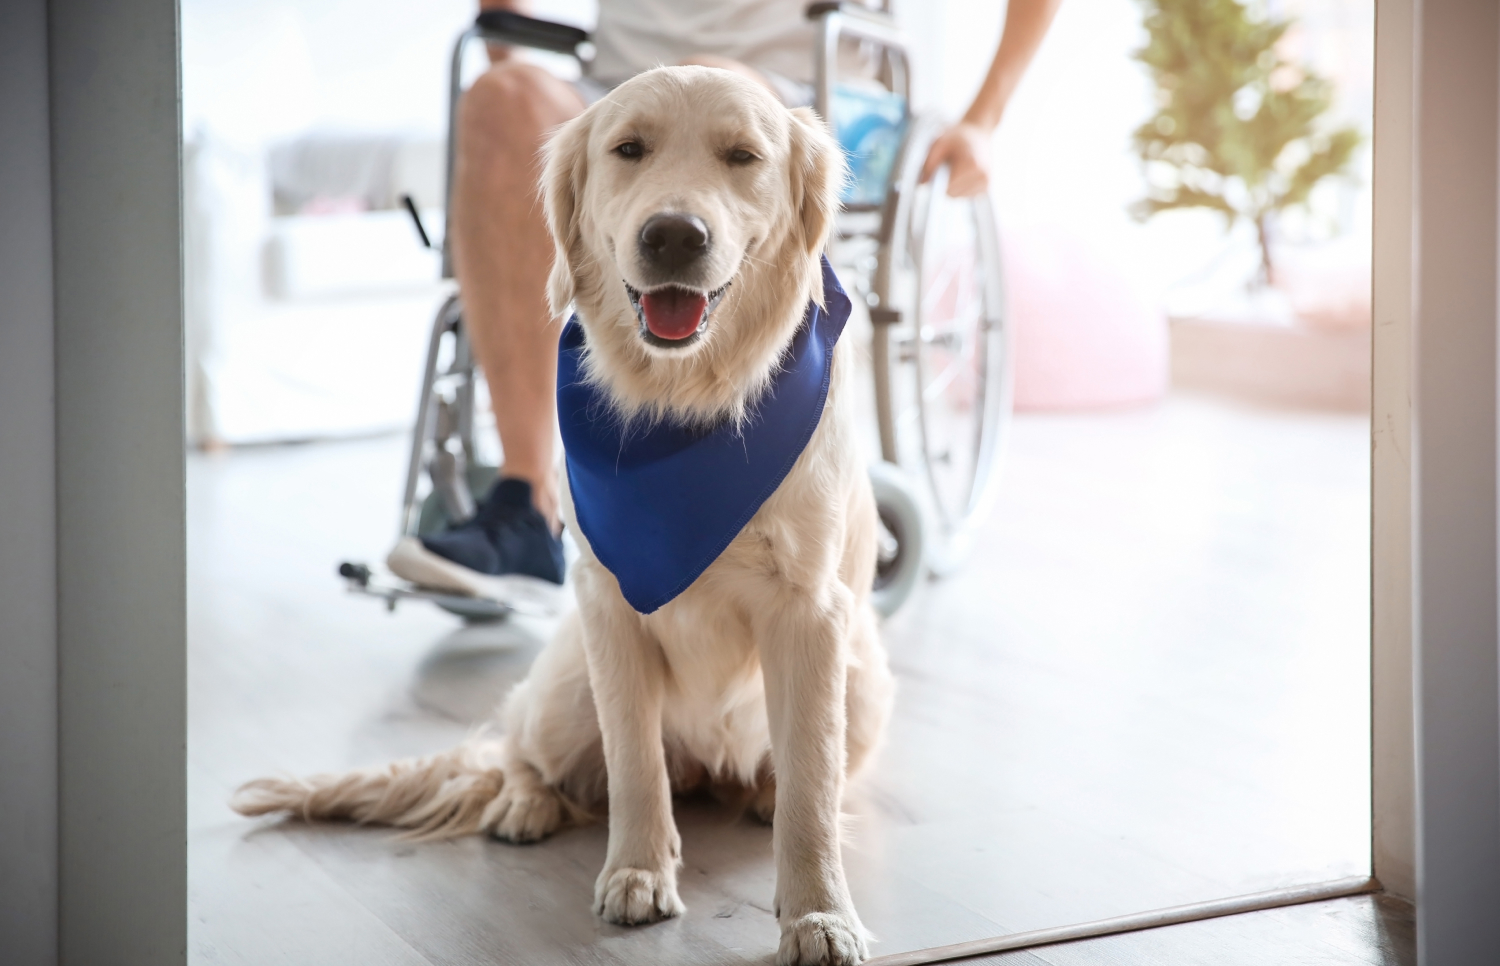 Service Dog Training: A How-To Guide